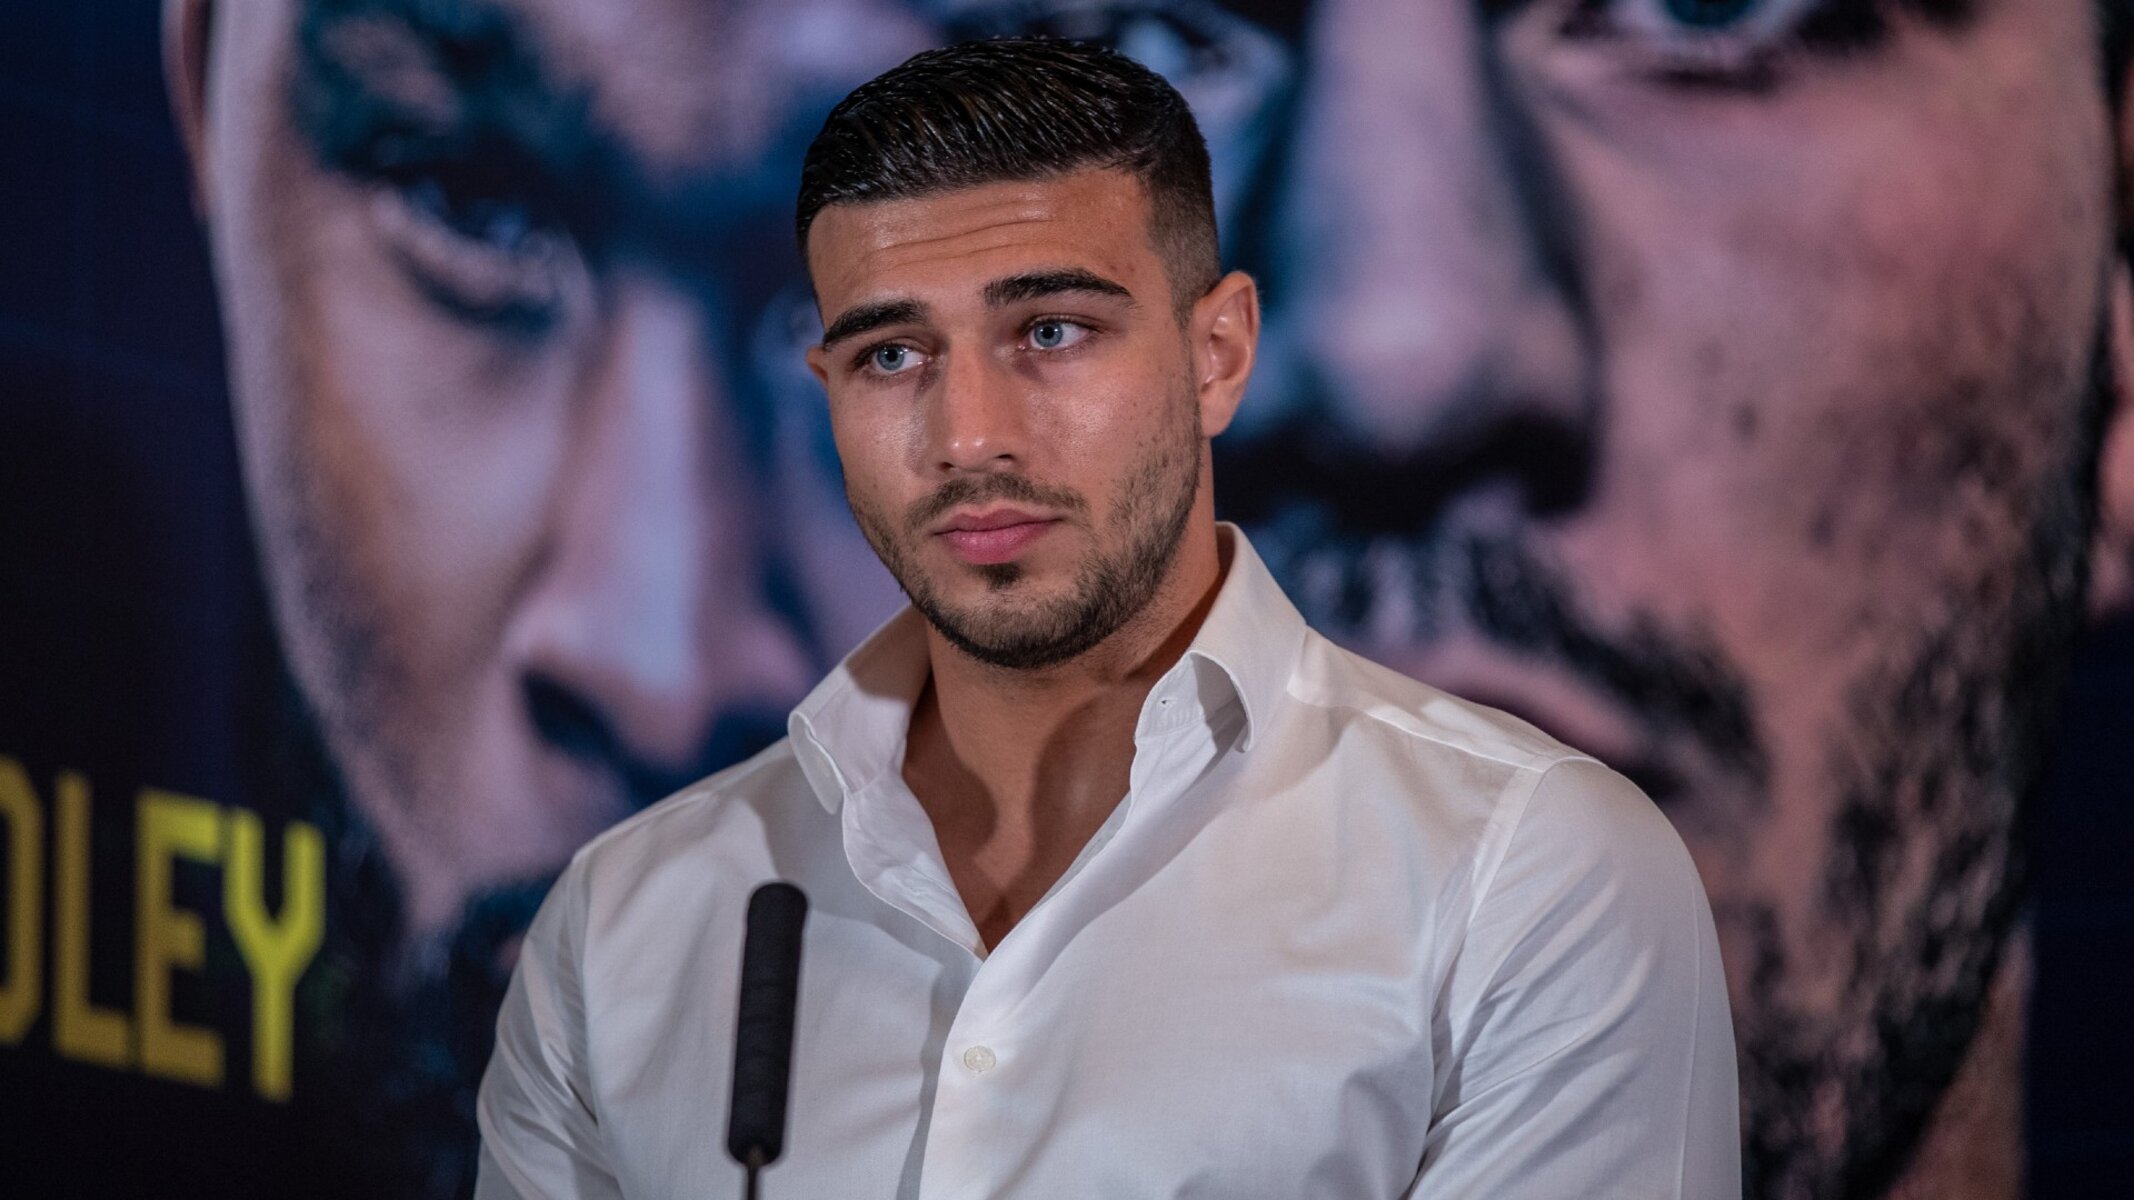 19 Intriguing Facts About Tommy Fury - Facts.net